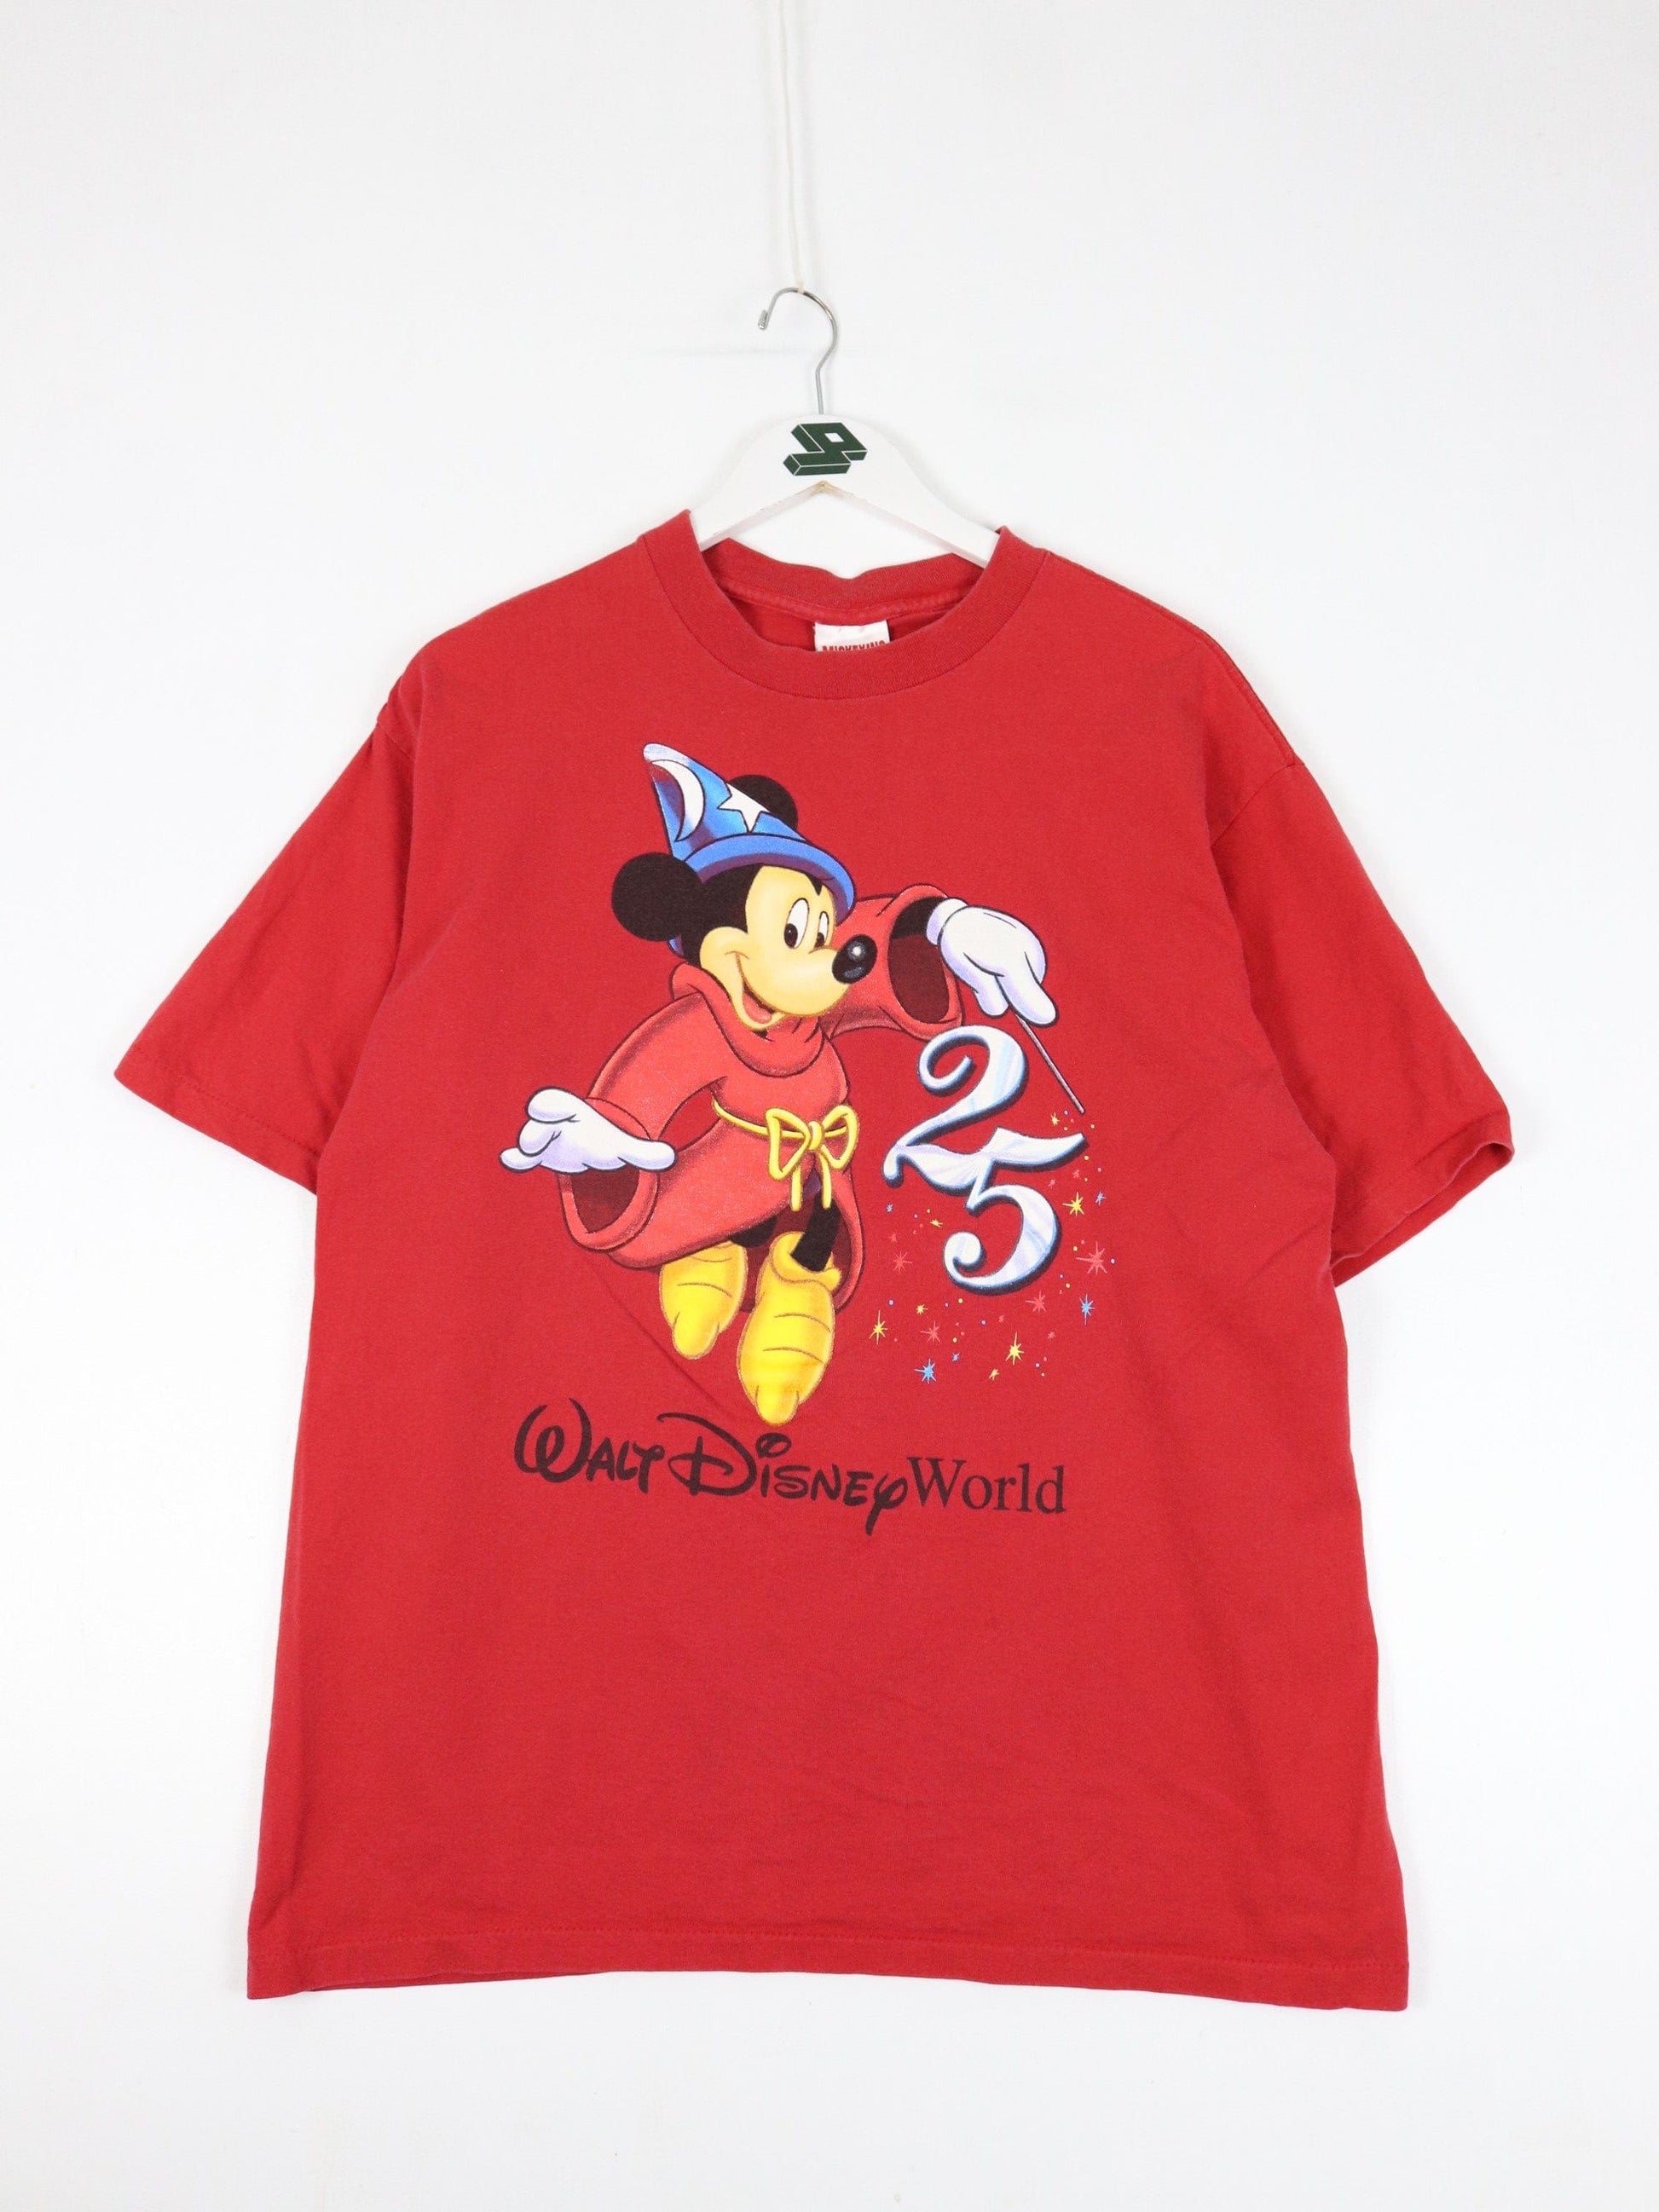 Vintage Disney T Shirt Mens XL Red Mickey Mouse 90s